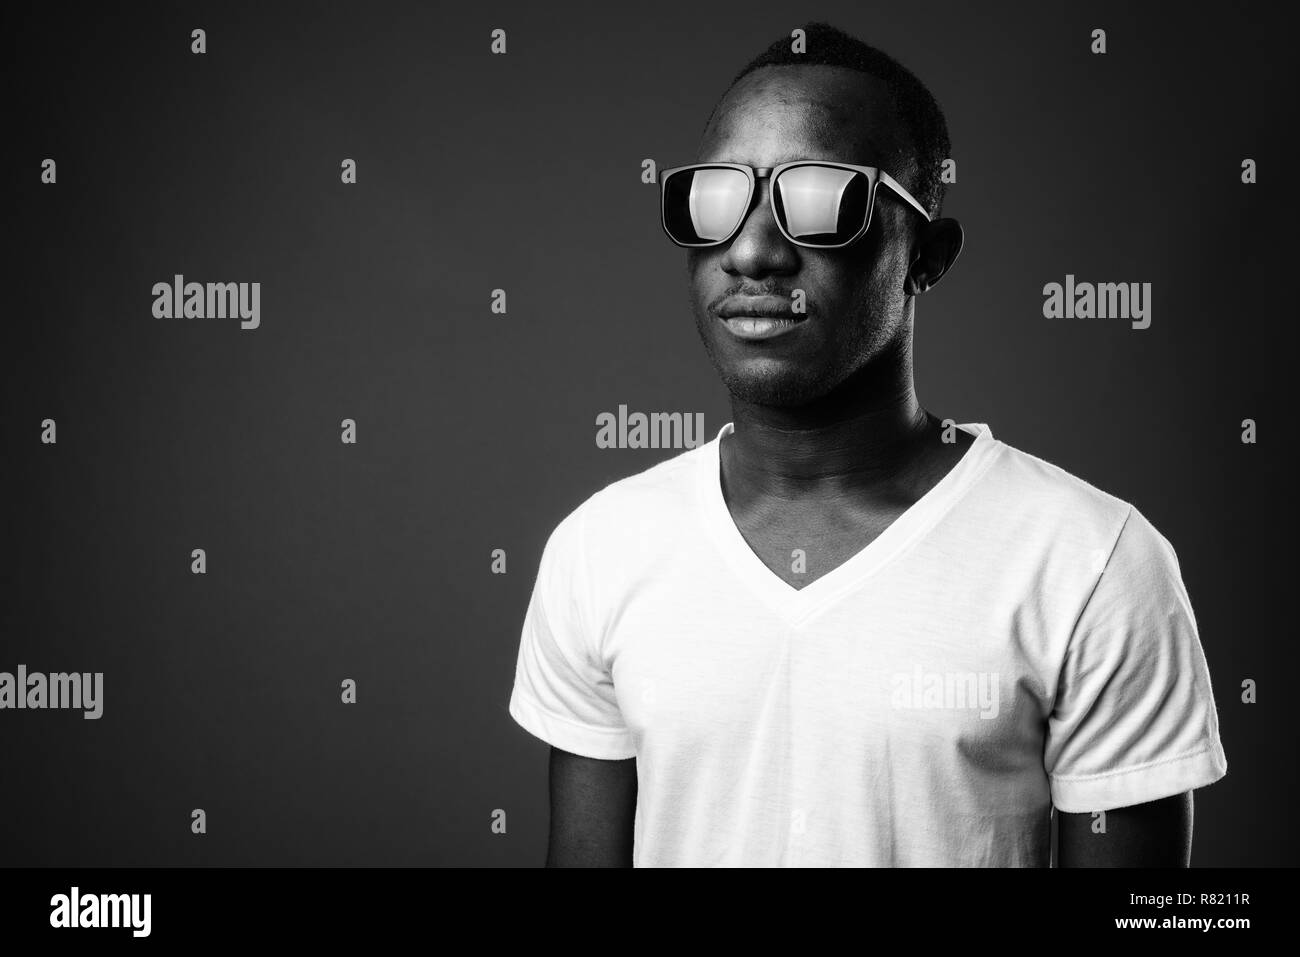 Young African man wearing sunglasses in black and white Stock Photo